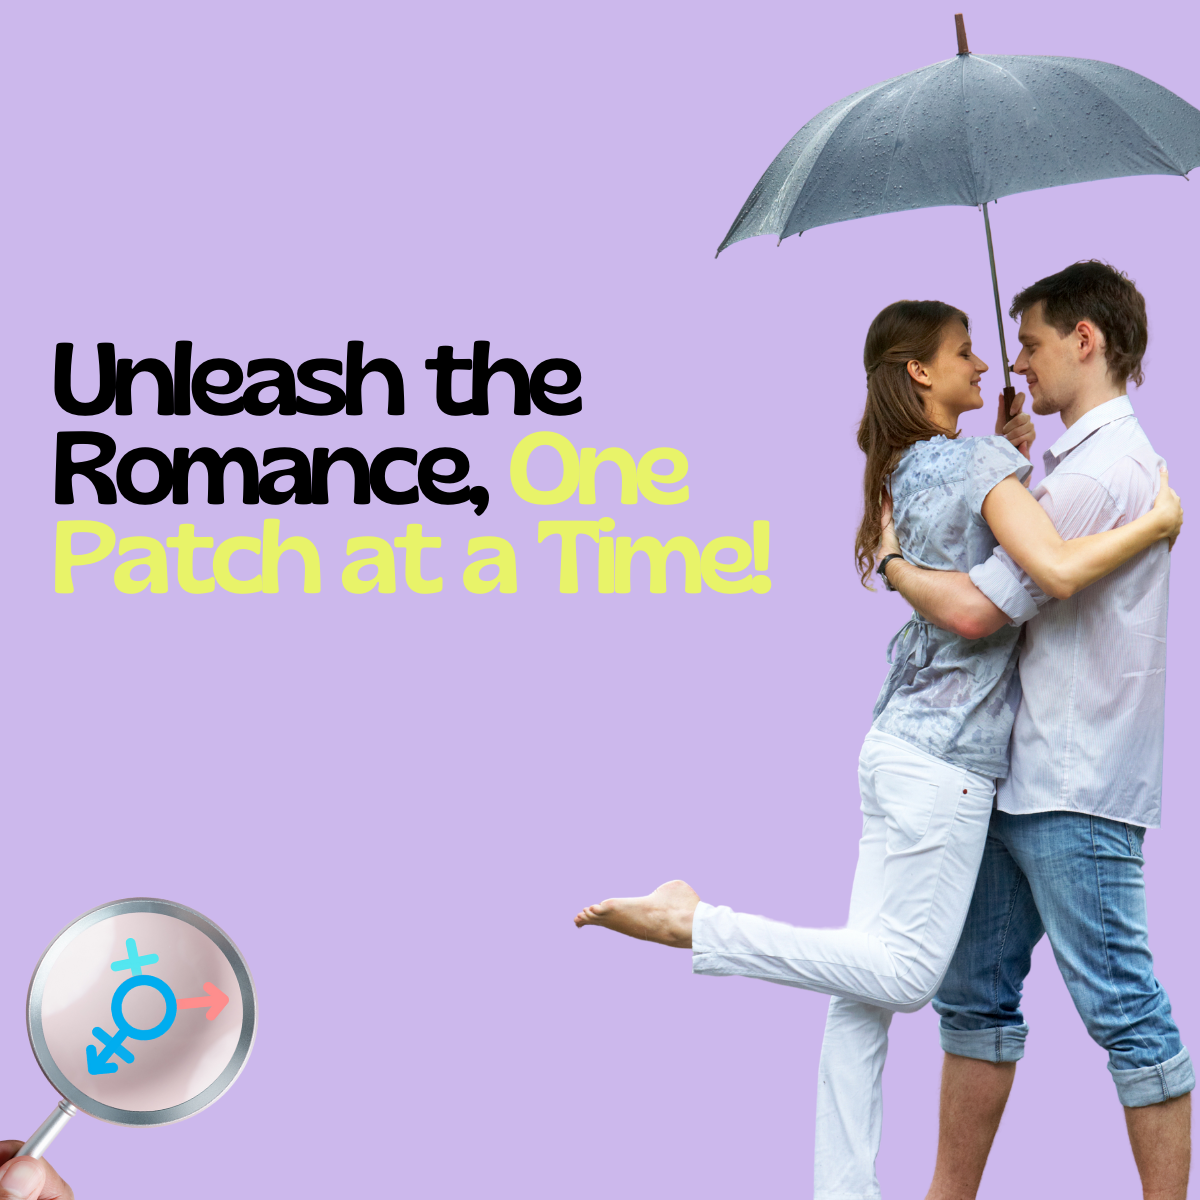 Passion Patch - Natural Patch to Boost your Libido